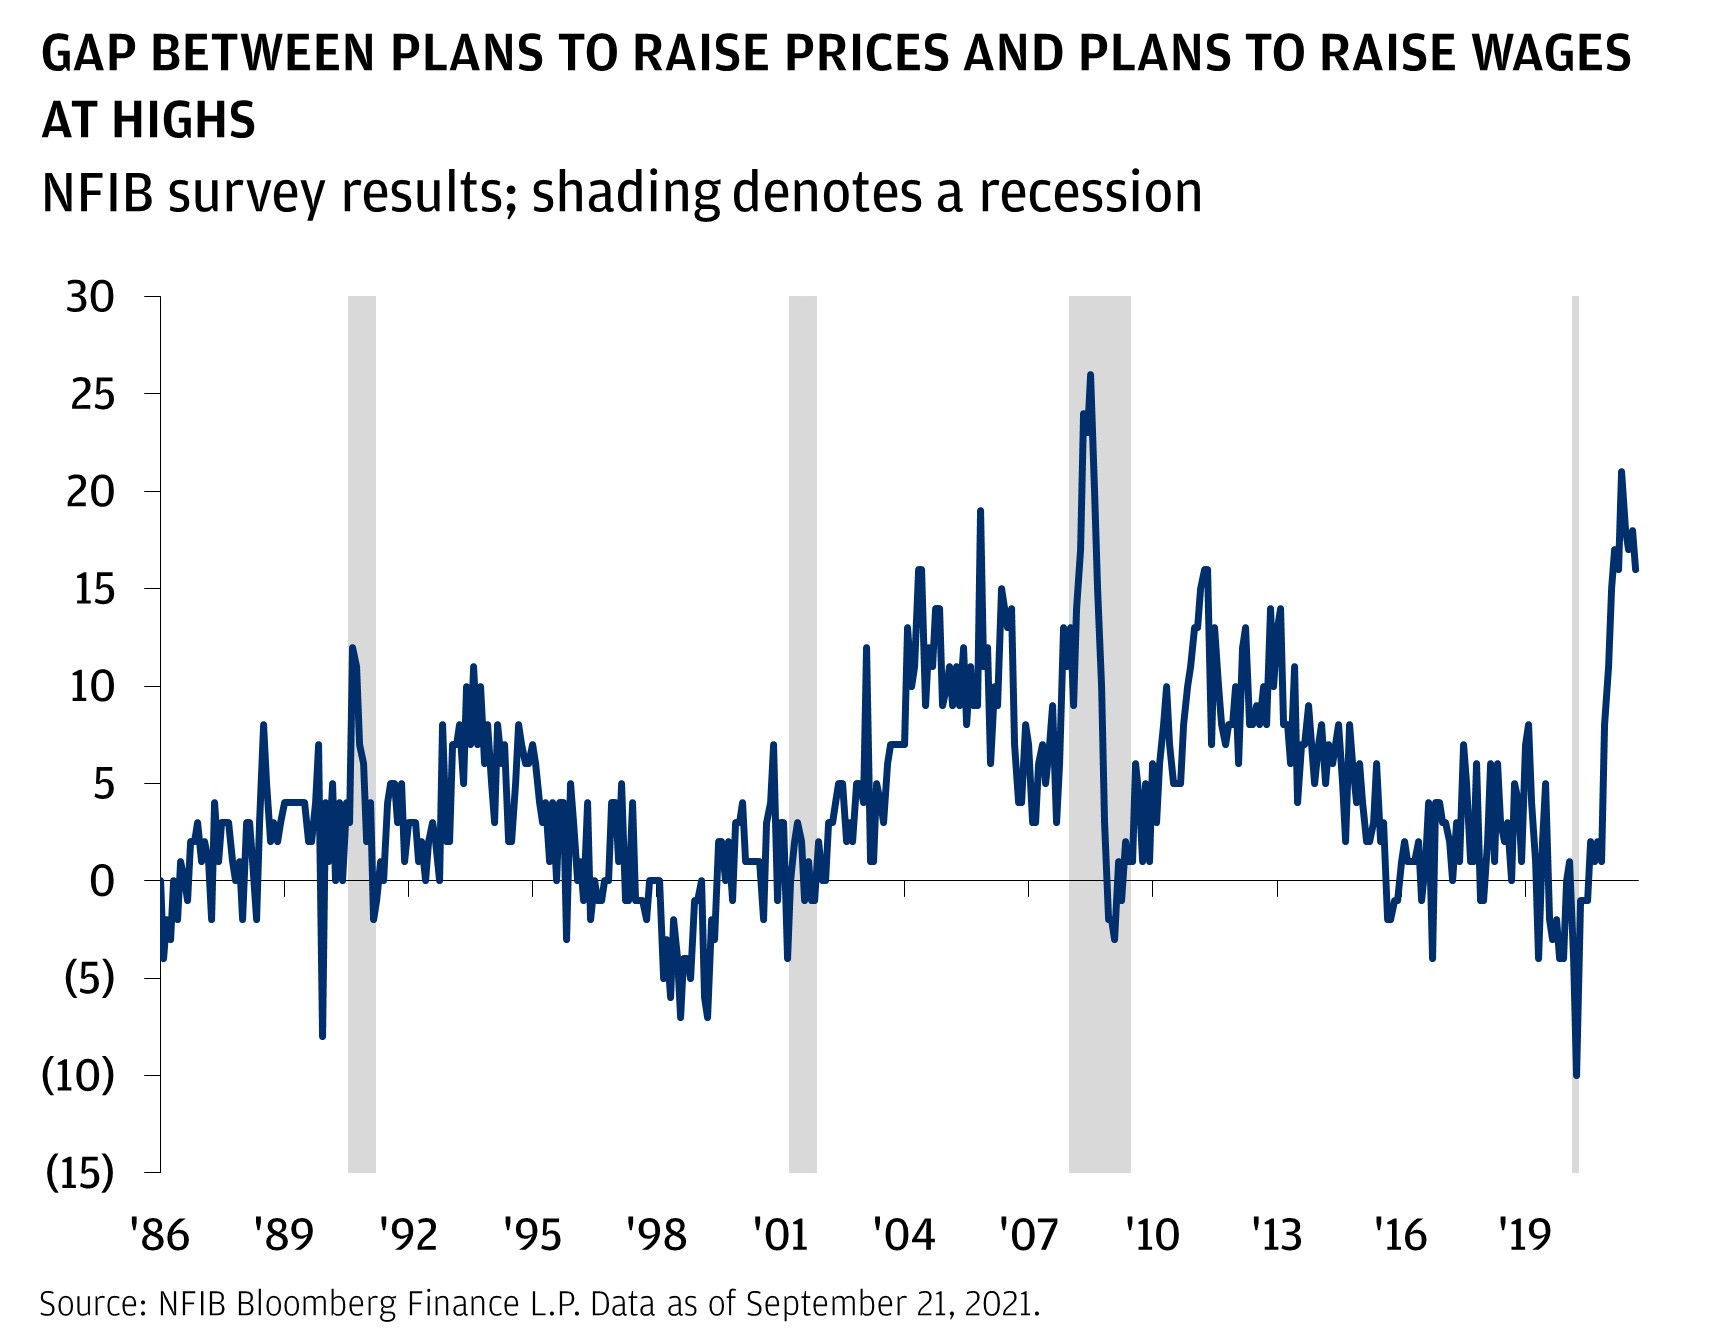 This chart shows the gap between plans to raise prices and plans to raise wages, from January 1986 to September 2021. A reading above 0 indicates more companies reporting intentions to raise prices than those planning to raise wages, and vice versa.  The indicator was 0 starting in January 1986. Here it rapidly declined to -4, and then it inclined to 8 by July 1988. After briefly falling in the fall of 1988, it then rose to 7 by November 1989. It then sharply declined to -8 by December 1989 before it inclined to 5 in March 1990. From there, it fell back to 0 before surging to a relative peak of 12 by September 1990. Then there was another decline to -2 by March 1991, and an increase to 5 by September 1991. Then it declined to 0 before surging to 11 by August 1993. We then saw a sharp decline to -3 in November 1995, and an incline to 5 by March 1997. Then there was another decline over time to a trough of -7 in April 1999 before rising back to 7 by November 2000.  The indicator then declined -4 before increasing and settling at -1 by November 2001, and then rose to a relative peak of 12 by February 2003. We saw another decline to 1 in April 2003 before a surge to 16 by June 2004. Then there was a drop to 8 by July 2005 before another incline to 19 by November 2005. Here it declined to 10 by March 2006, and then rose again to 15 by May 2006. Then there was another drop to 3 before surging to an all-time high of 26 by July 2008.  The Global Financial Crisis recession prompted a sharp decline to -3 by February 2009 before a gradual increase to 16 by May 2011. From here, there was a gradual decline to a relative trough of -2 by September 2015 before it started rising again, reaching 7 by July 2017. The indicator remained rangebound between -1 and 7 until it broke out to 8 by February 2019.  The indicator declined to its lowest point of -10 by April 2020 before surging to 21 by May 2021. The latest results from September 2021 showed the indicator at 16.